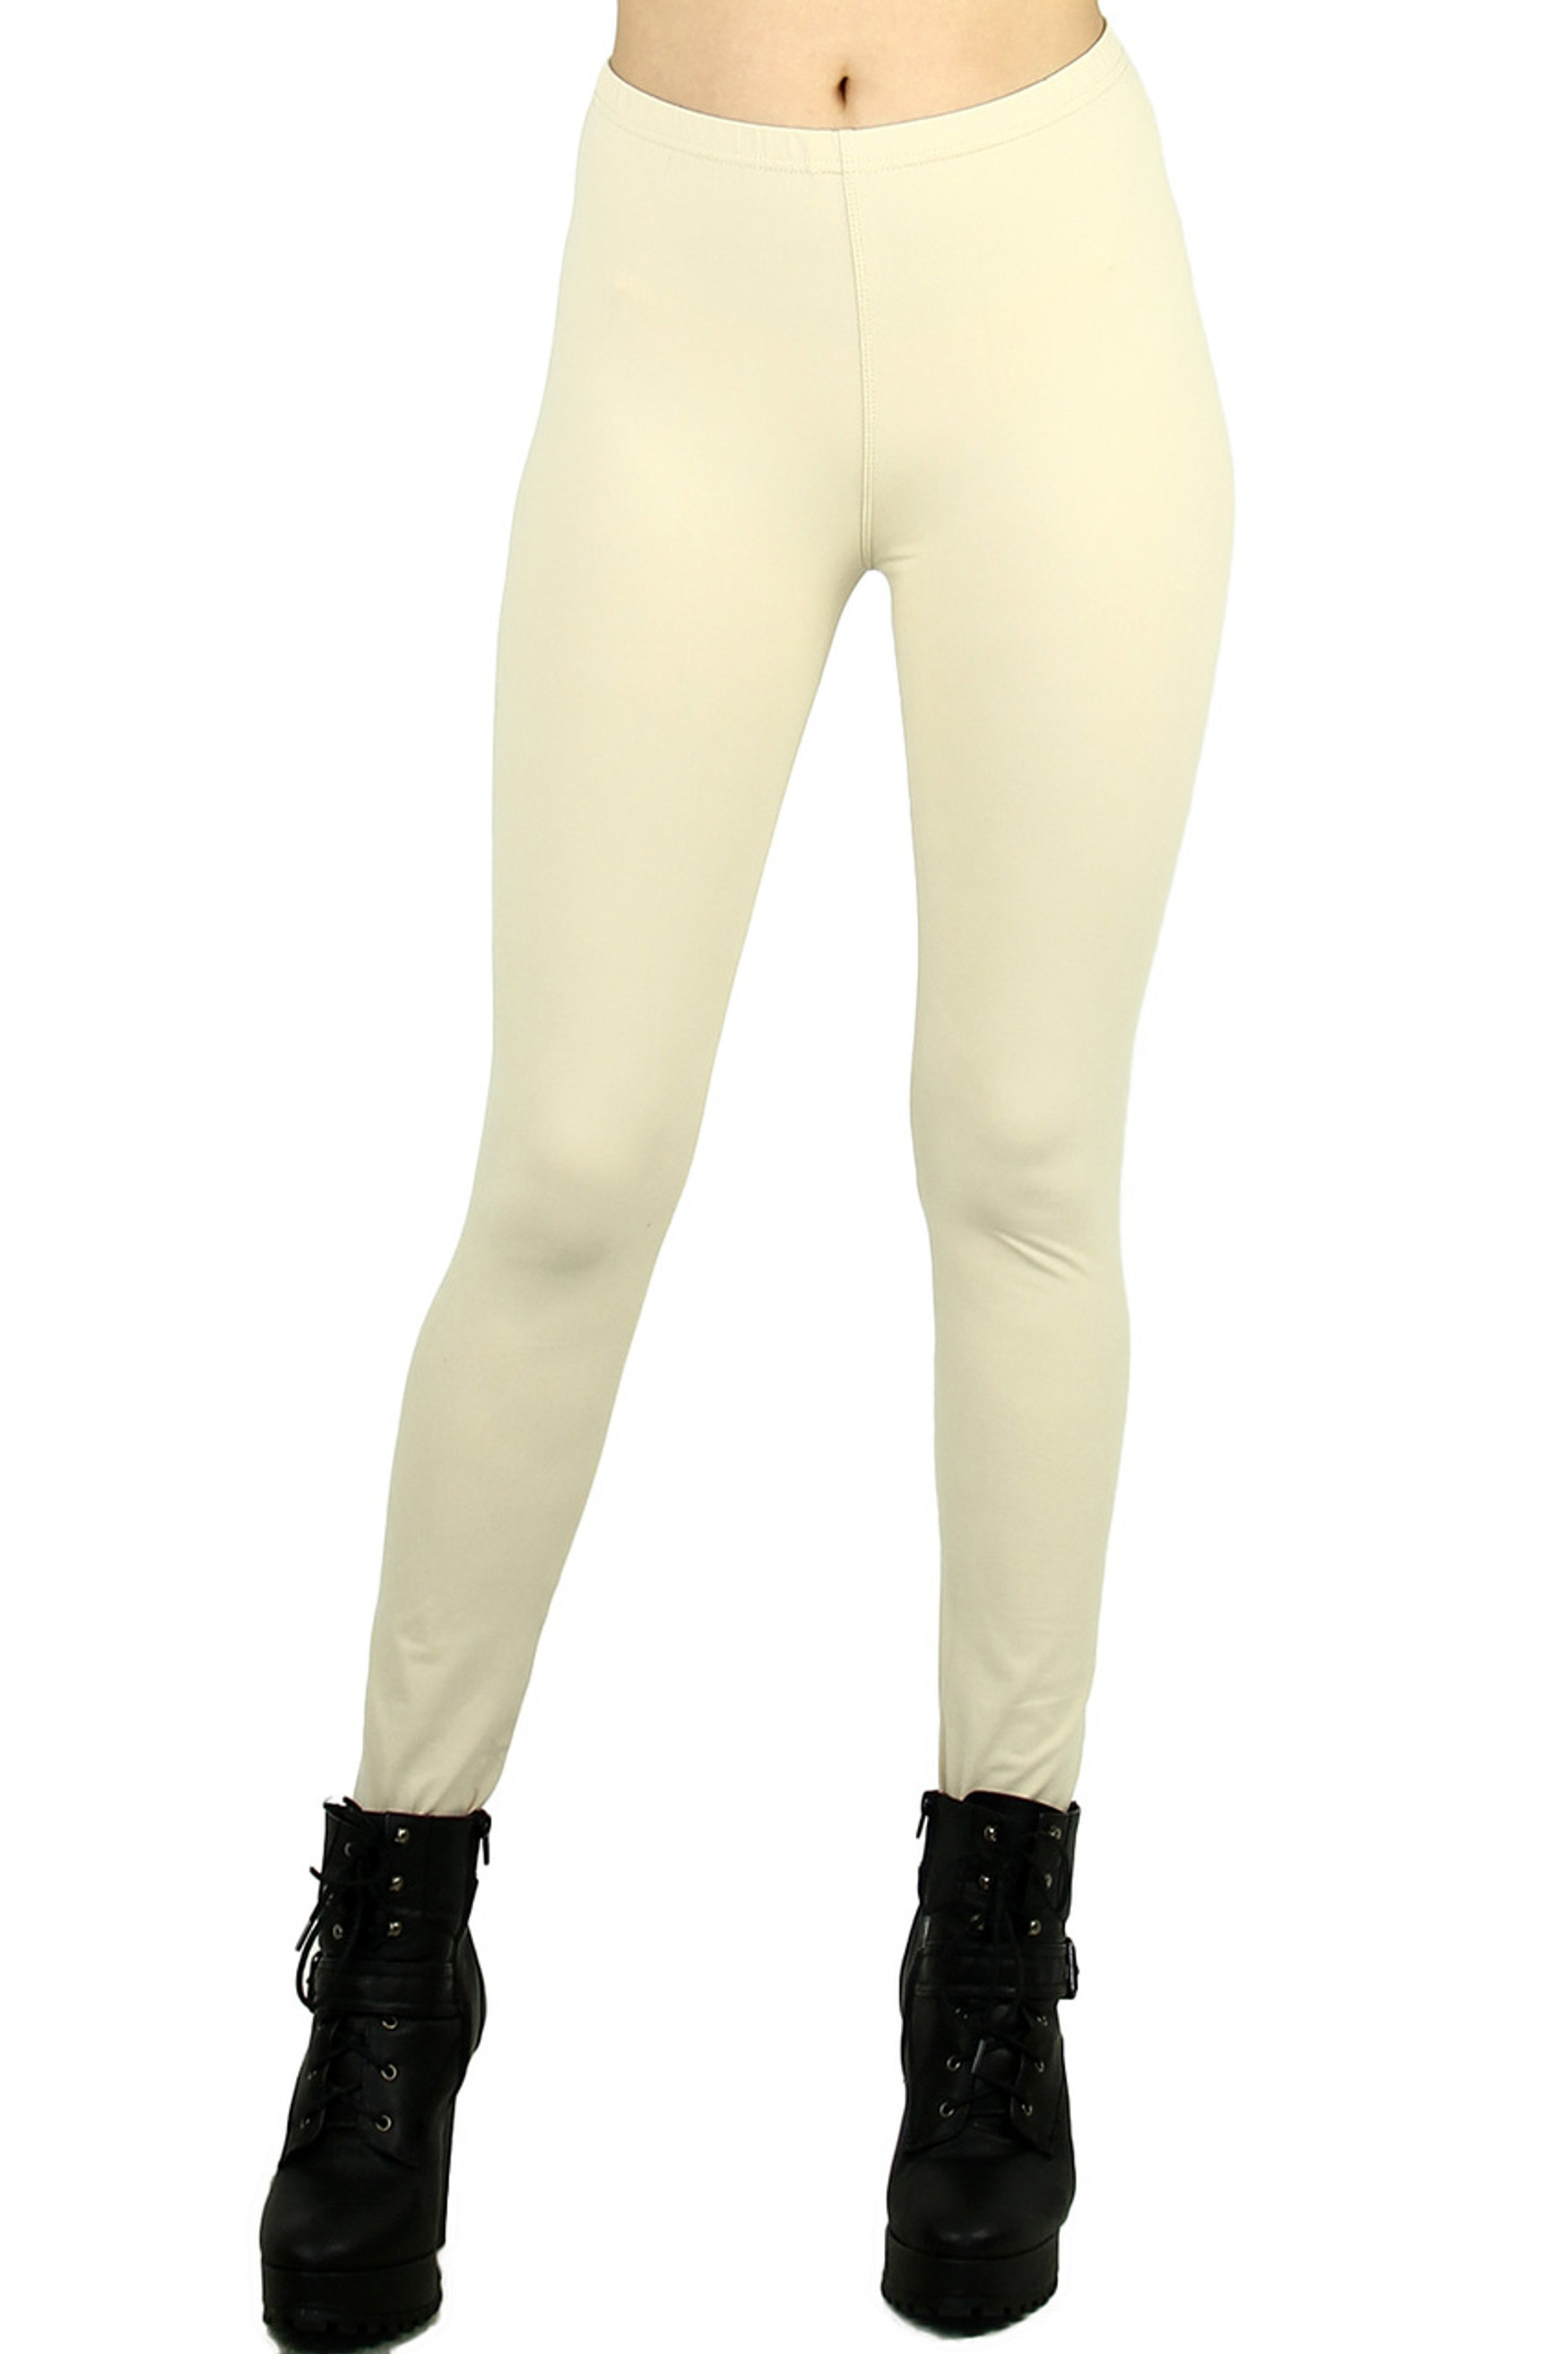 Brushed Buttery Soft Basic Solid Leggings